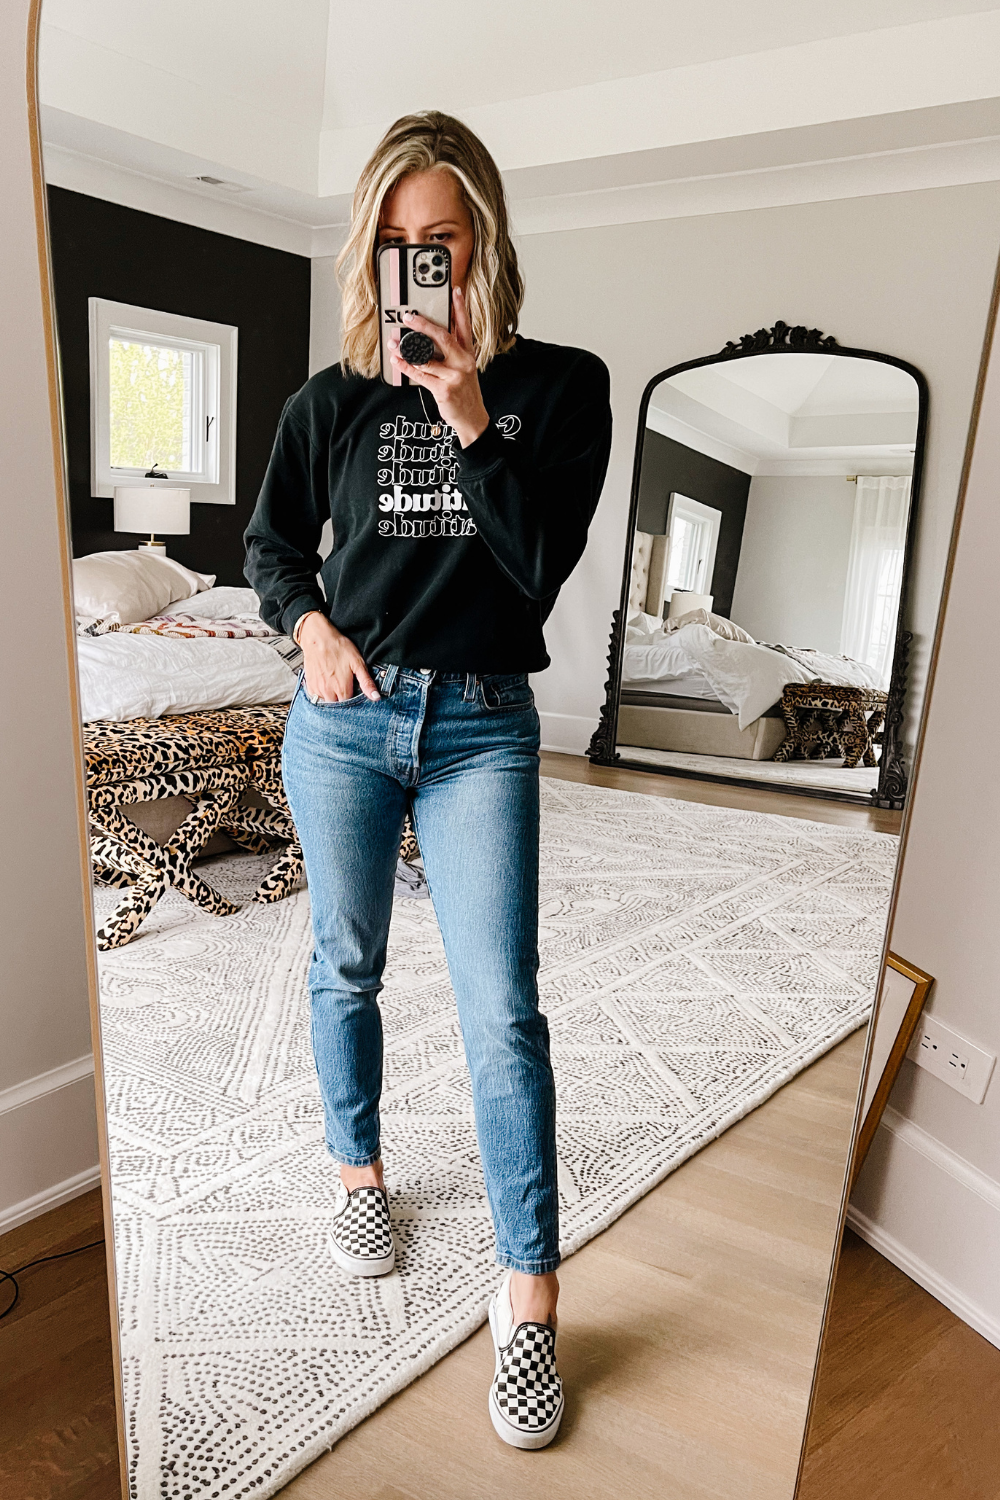 Suzanne wearing a "gratitude" pullover, denim jeans, and Vans